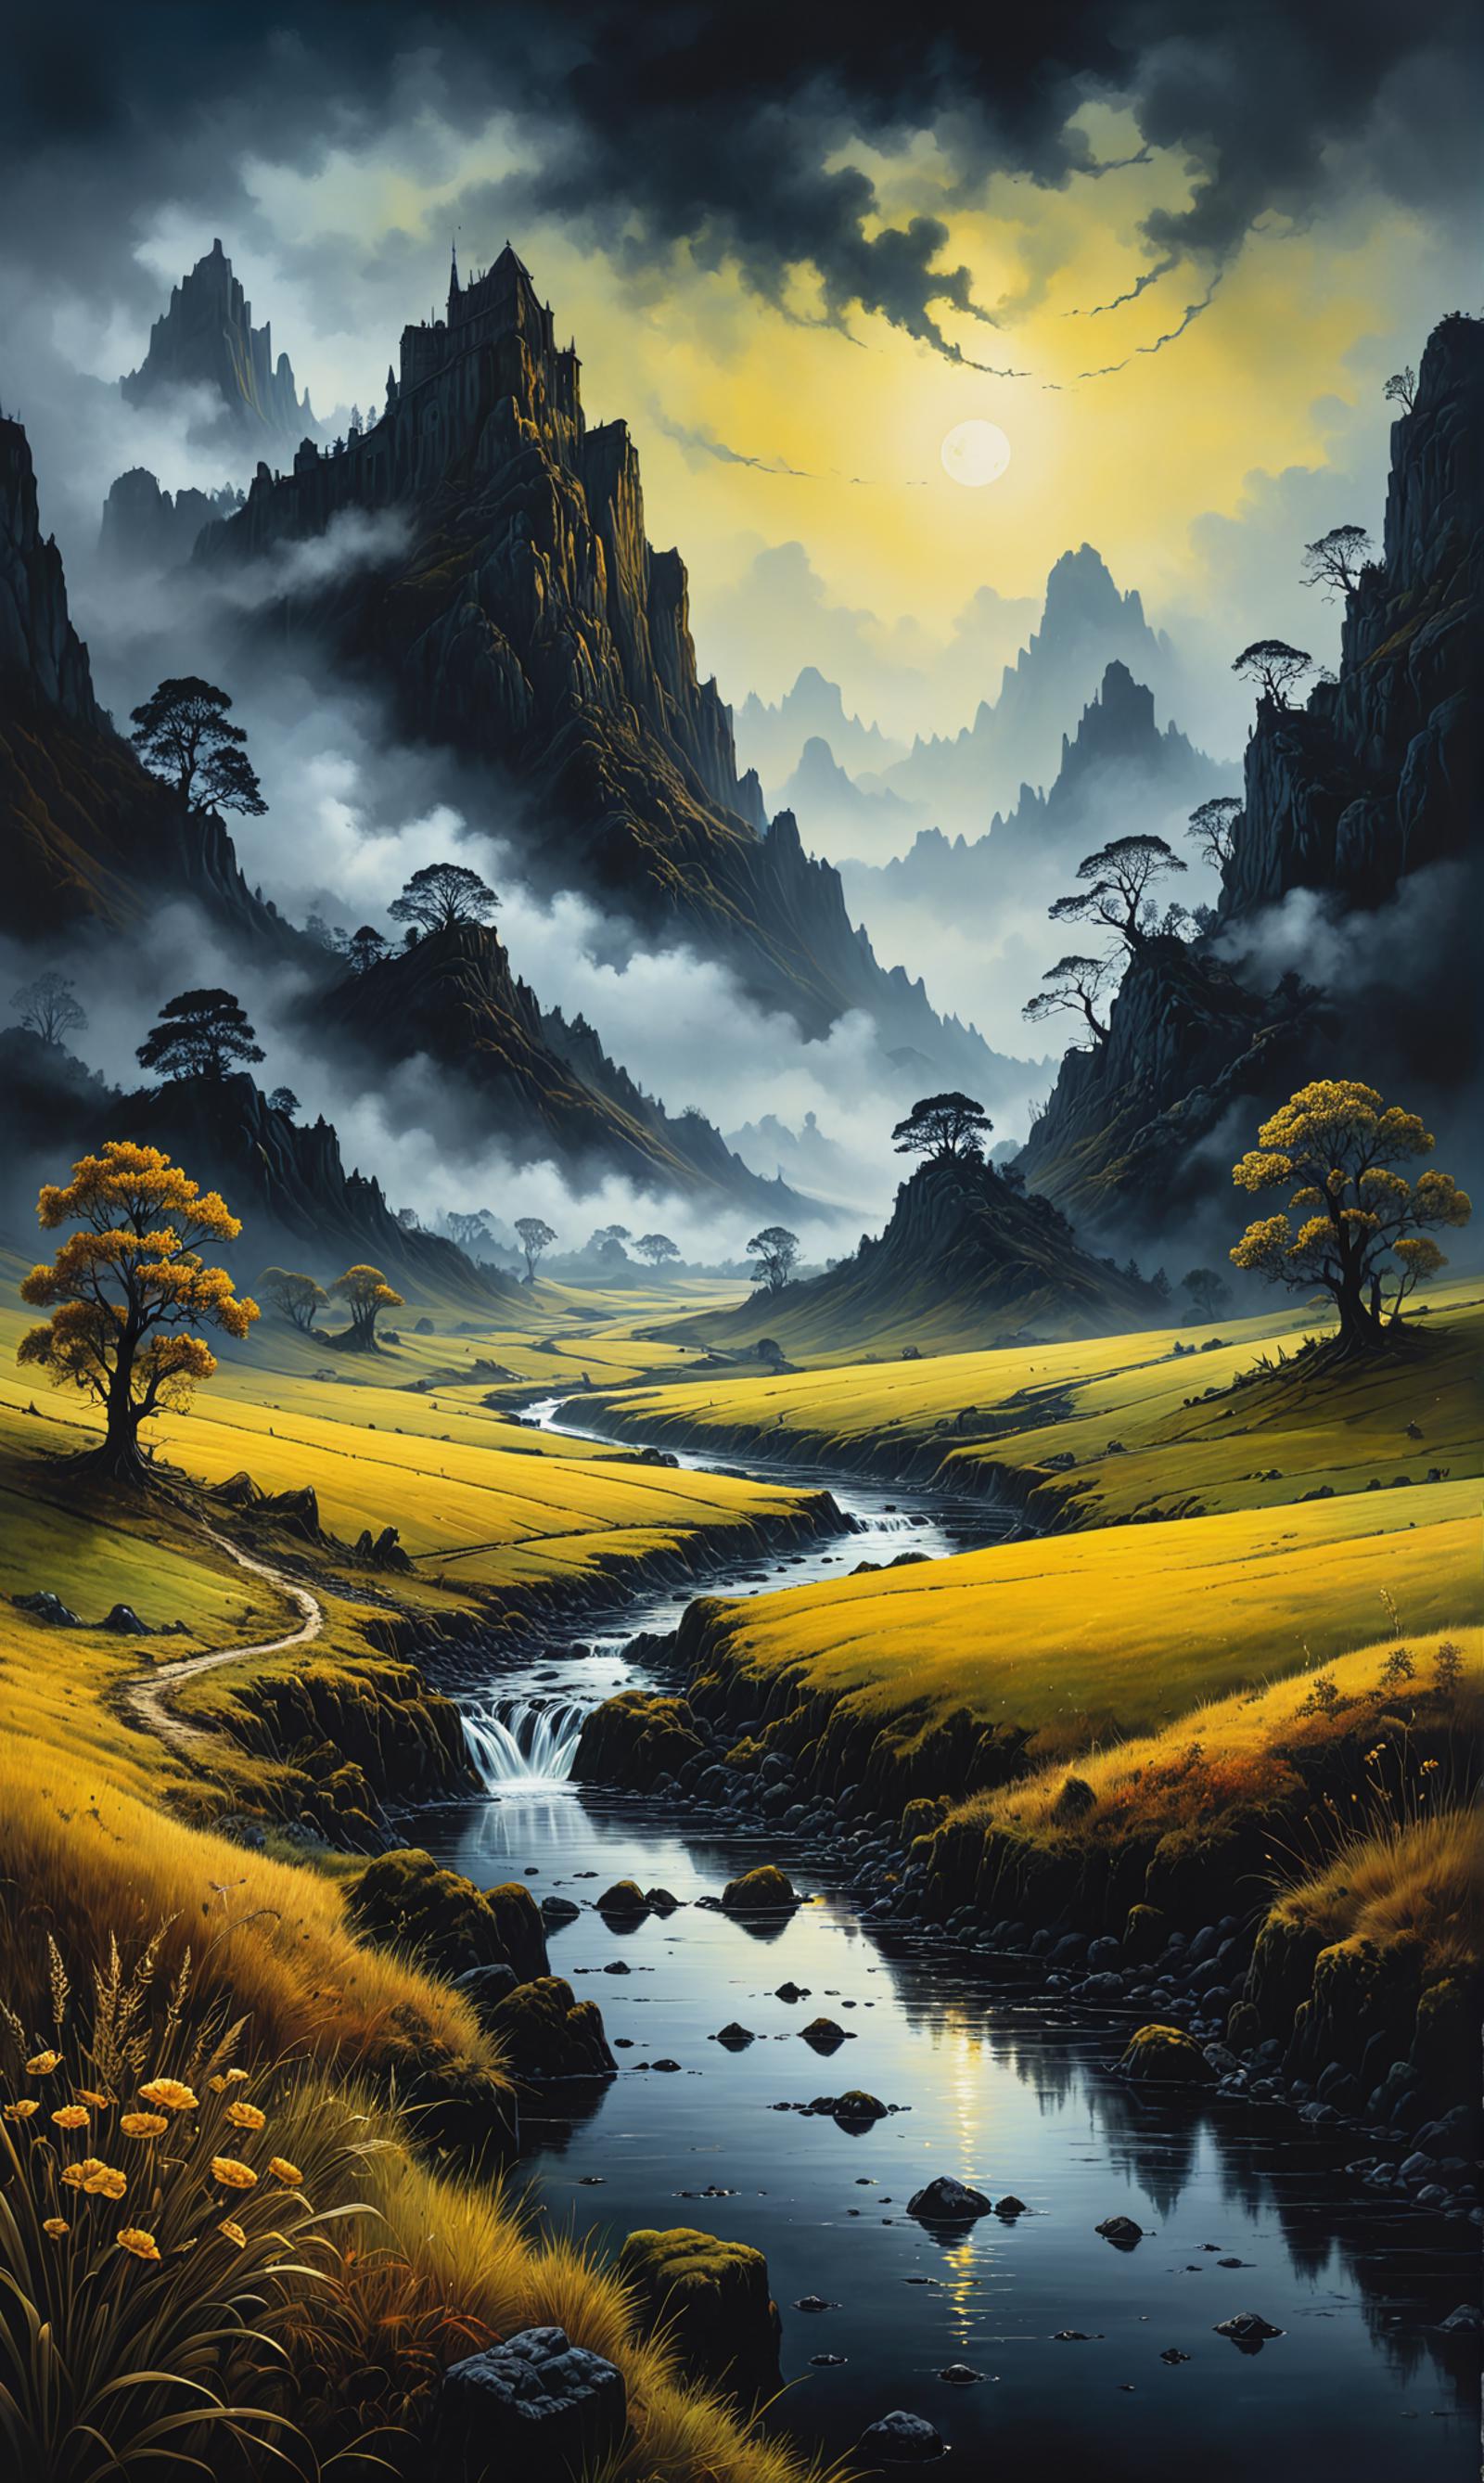 Painting of a picturesque valley with a river flowing through it, surrounded by mountains and trees.